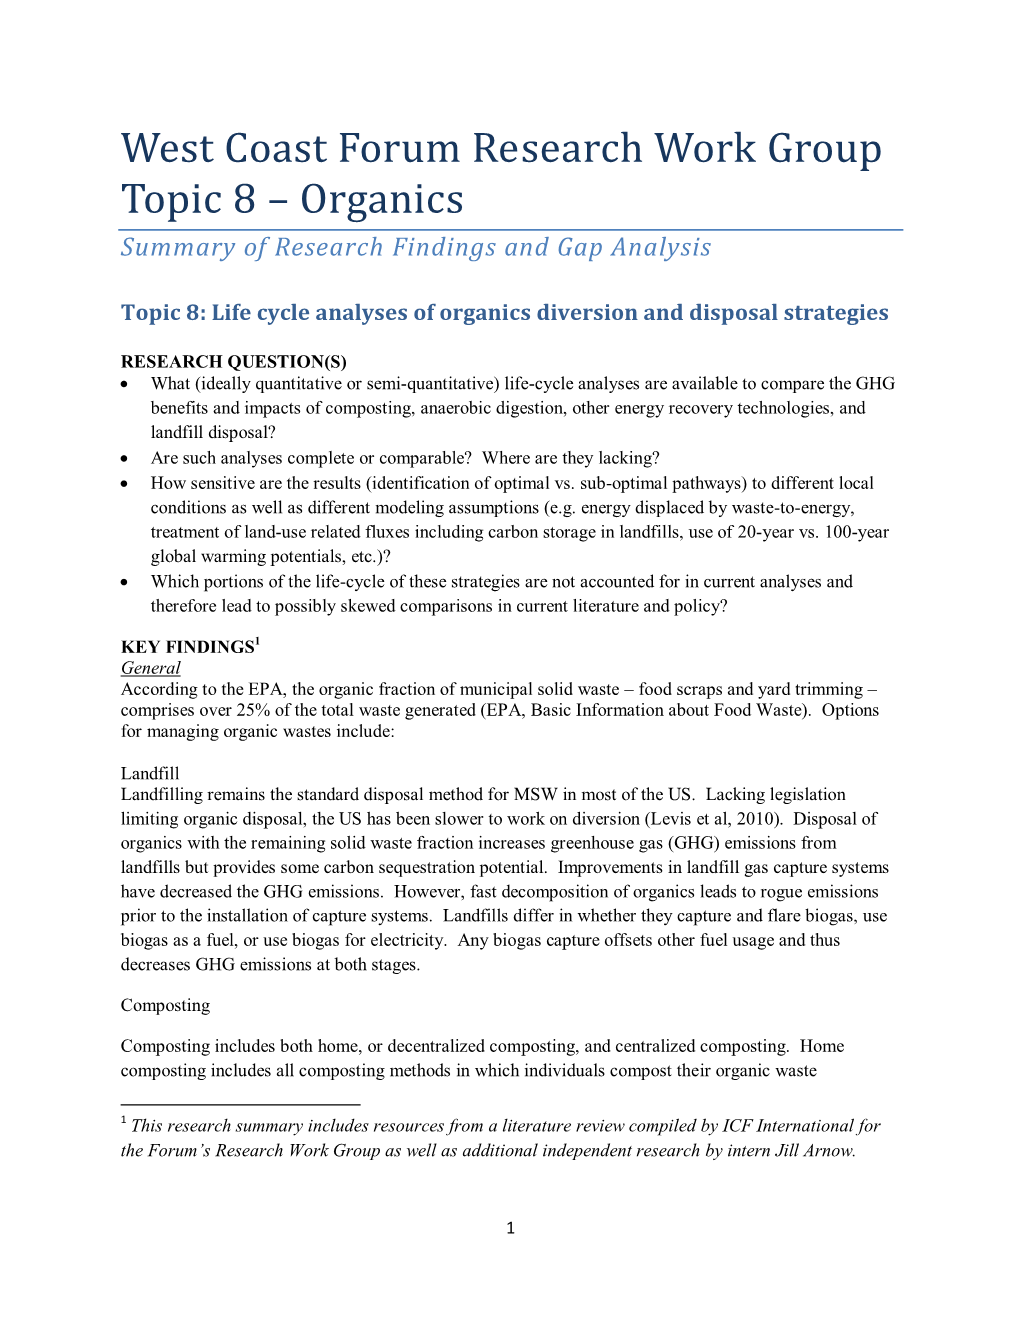 West Coast Forum Research Work Group Topic 8 – Organics Summary of Research Findings and Gap Analysis